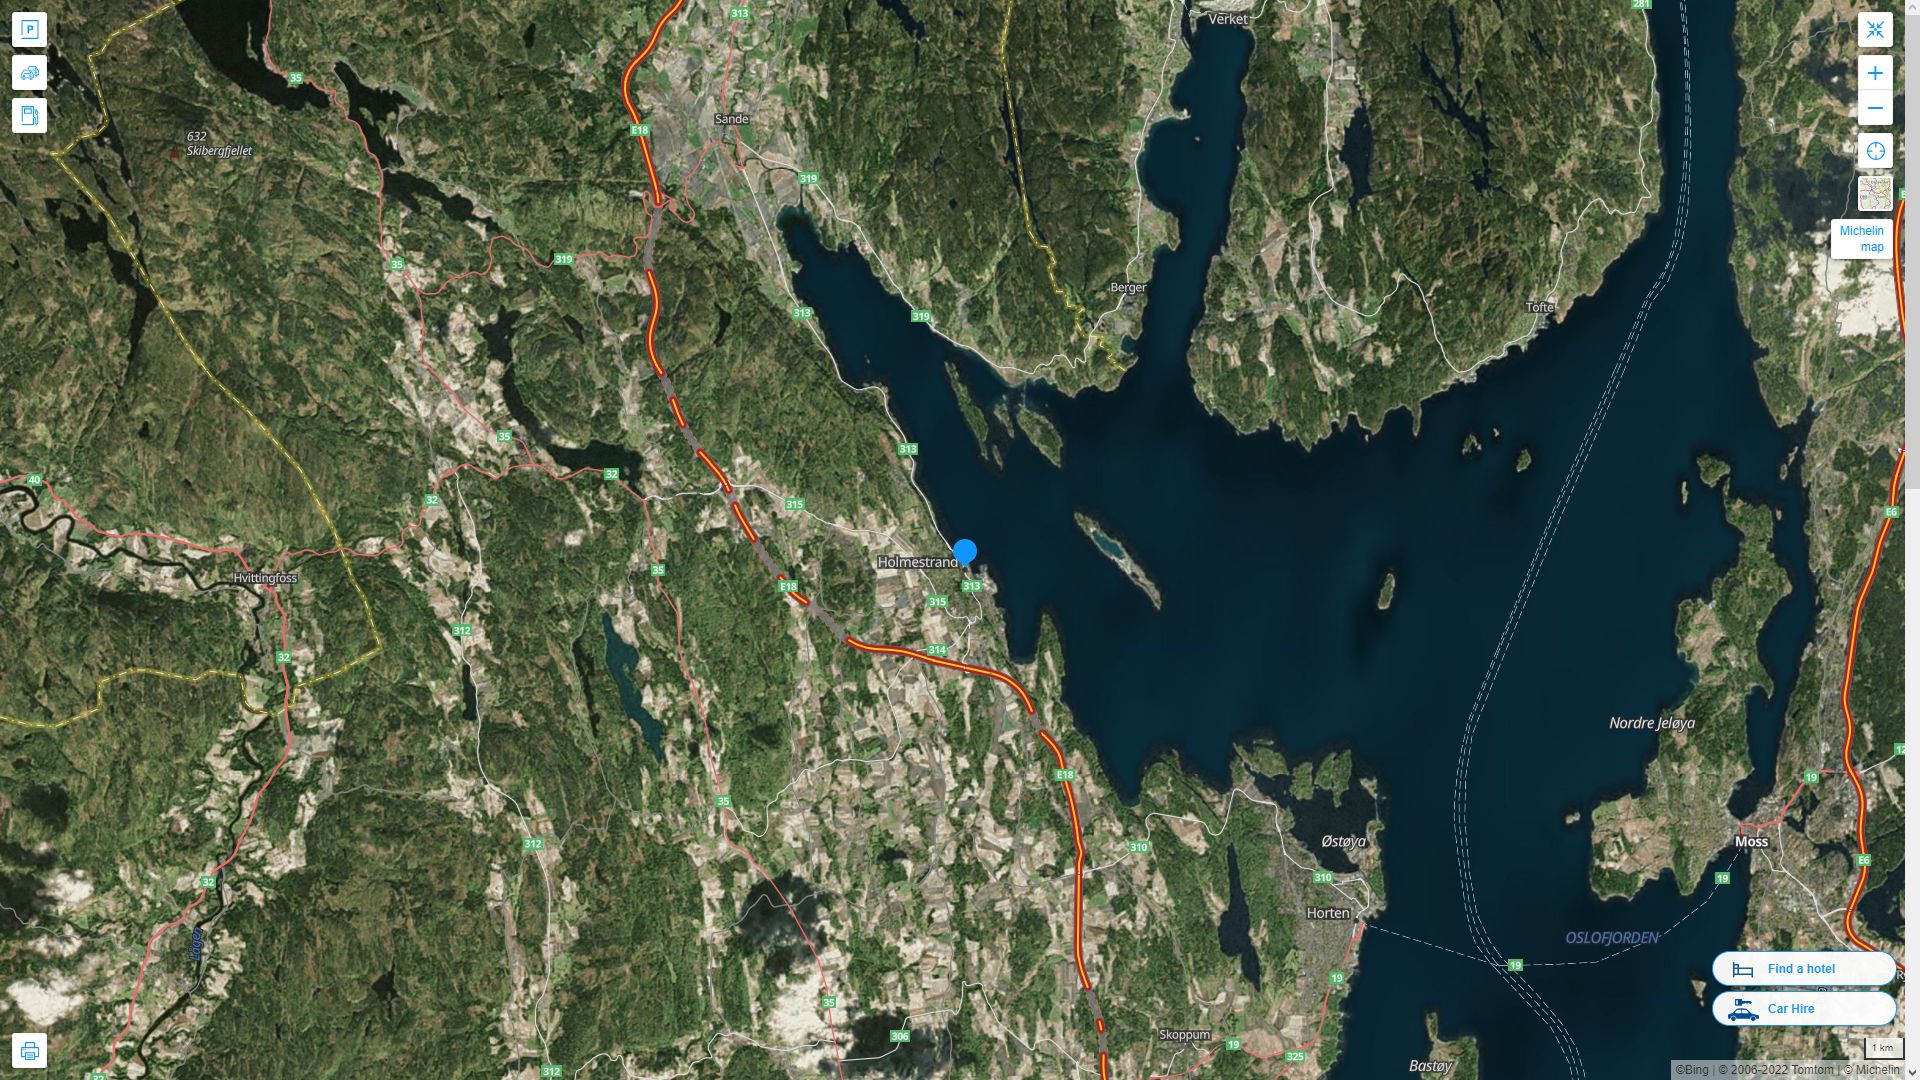 Holmestrand Highway and Road Map with Satellite View